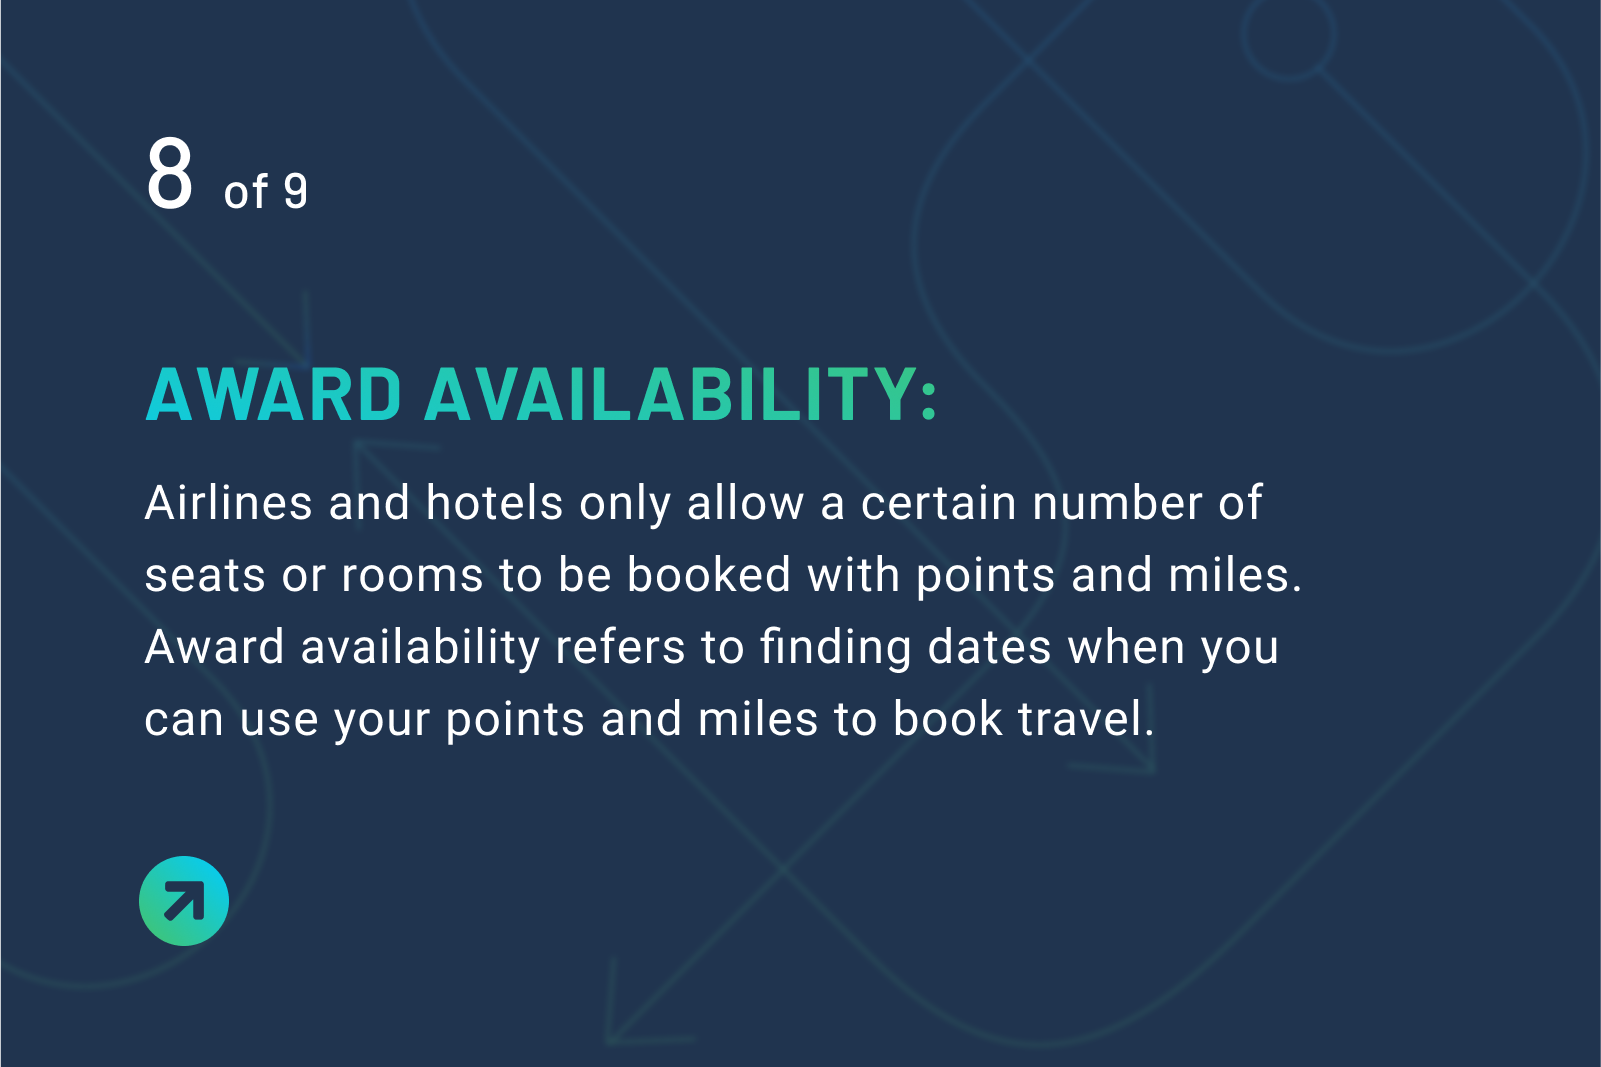 Award availability definition: Airlines and hotels only allow a certain number of seats or rooms to be booked with points and miles. Award availability refers to finding dates when you can use your points and miles to book travel.